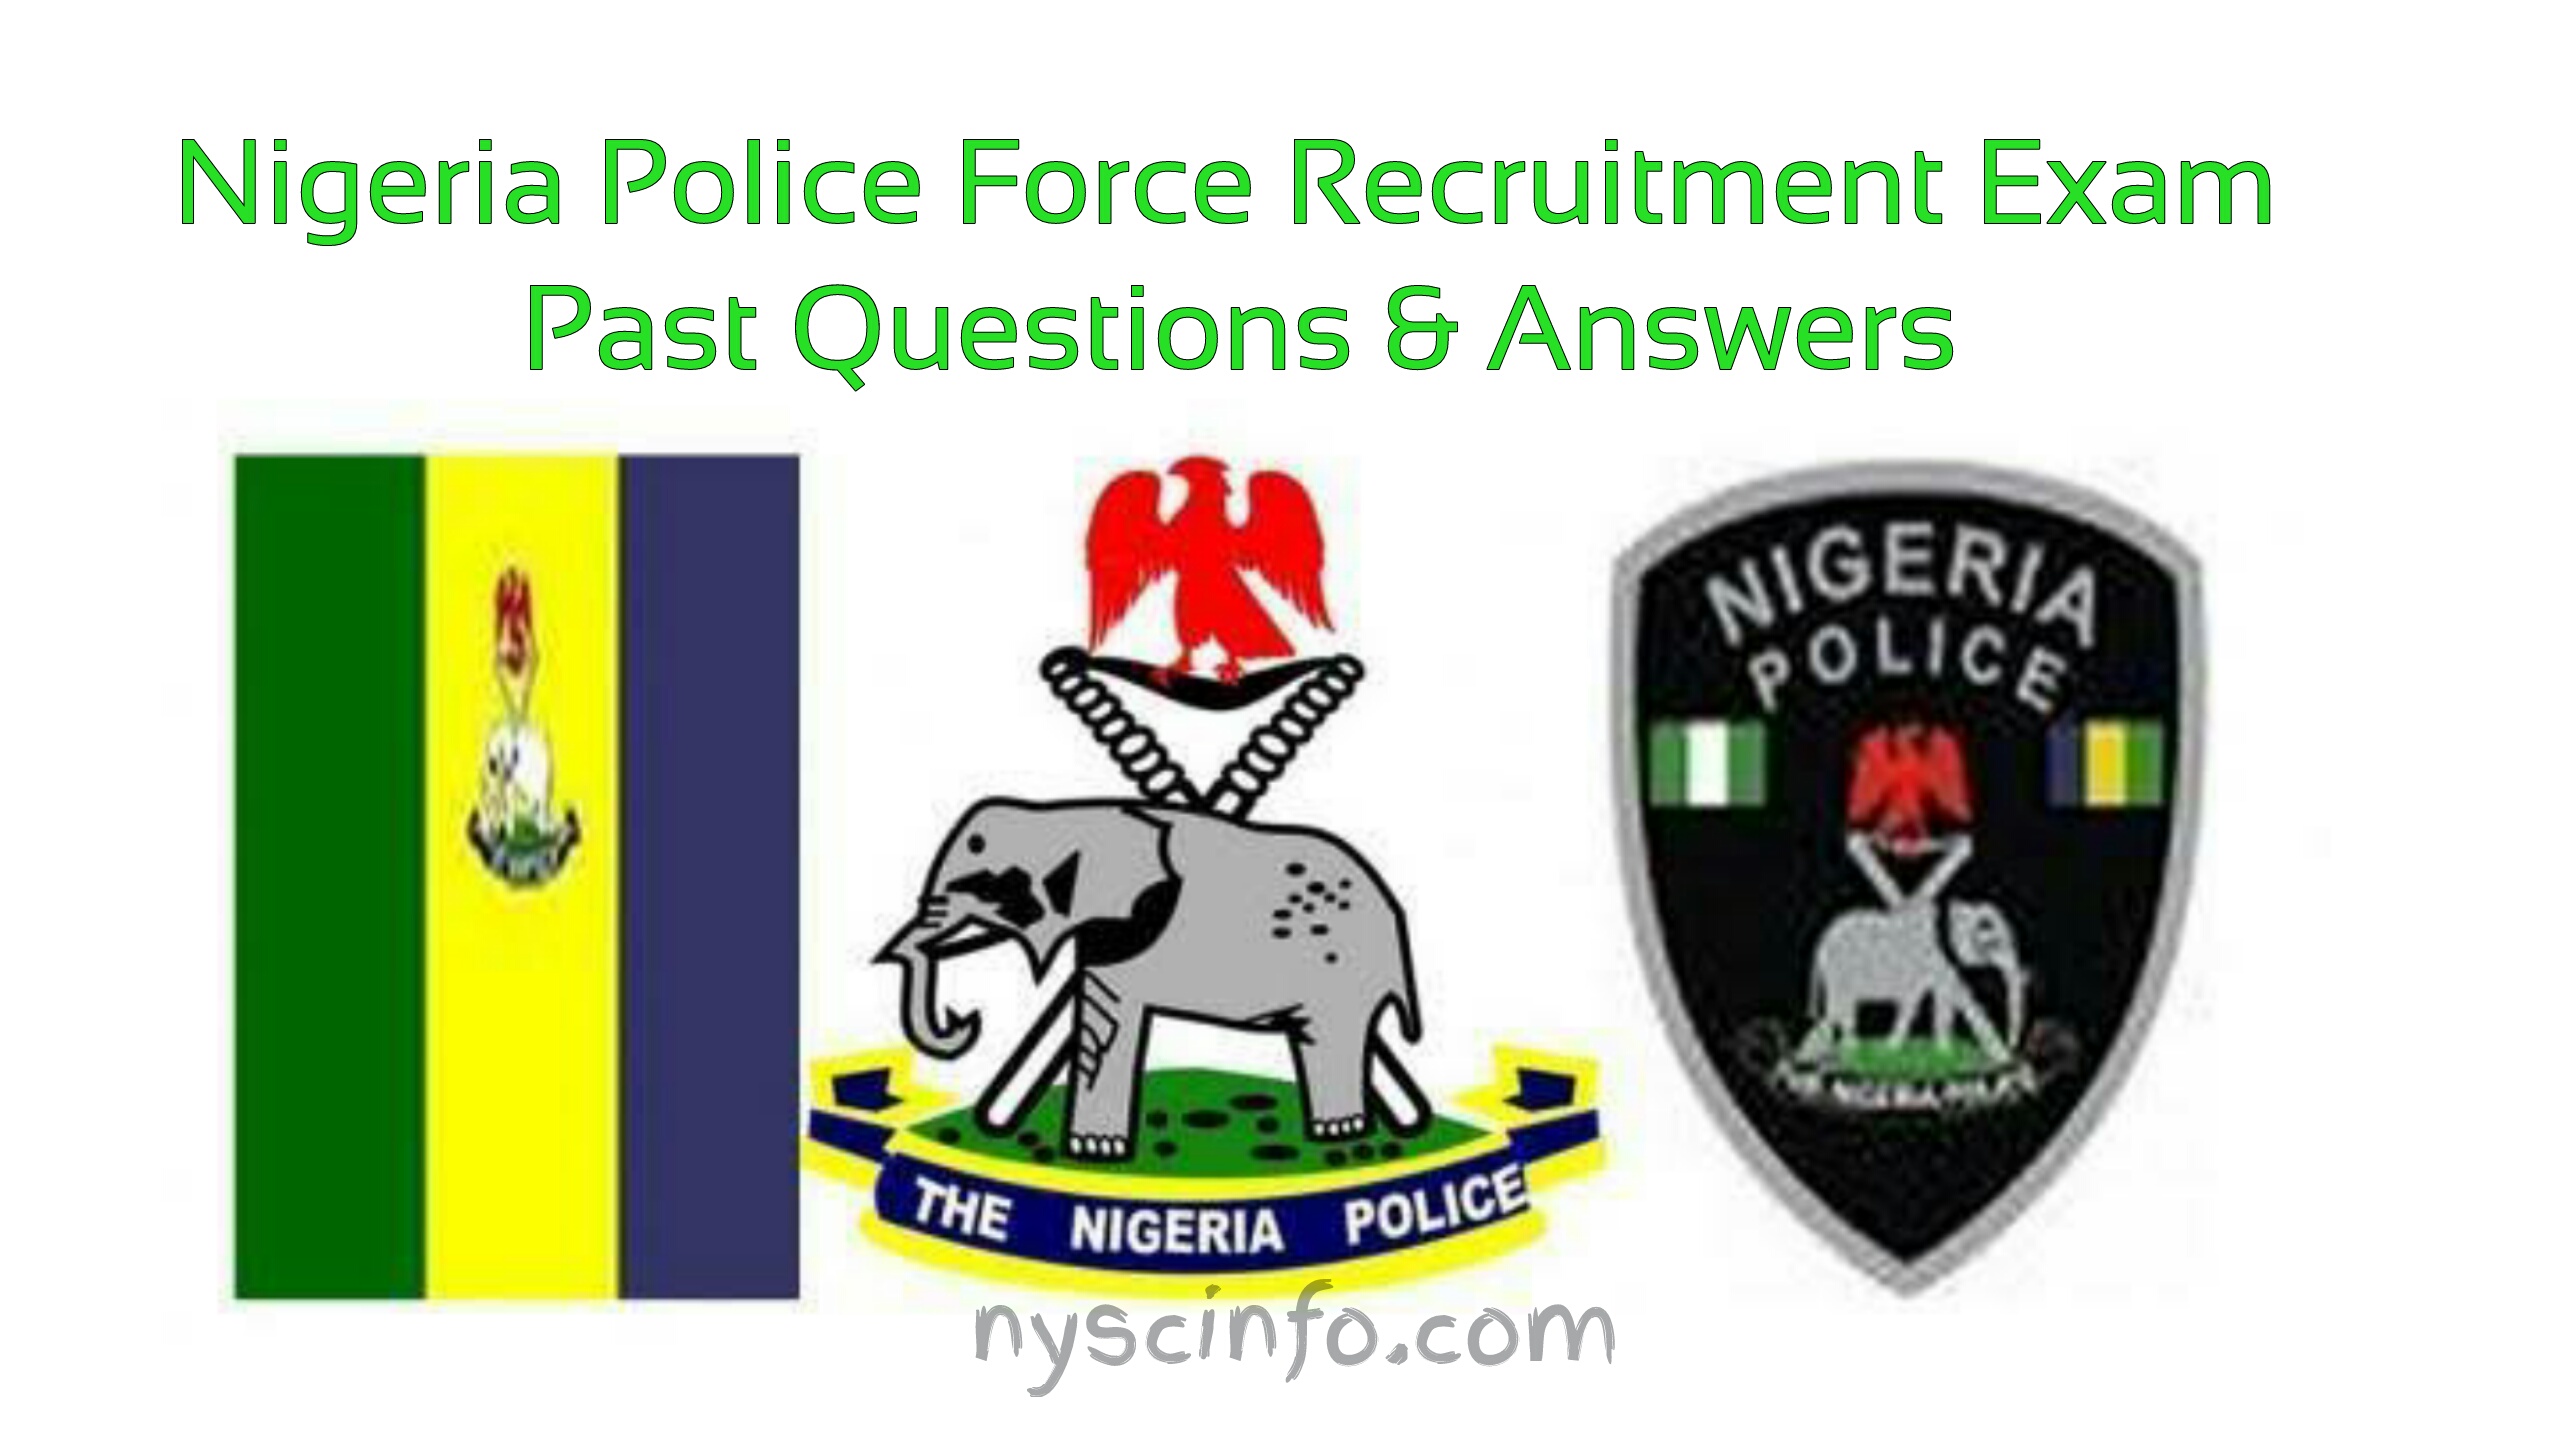 Nigeria Police Force Recruitment Exam Past Questions & Answers